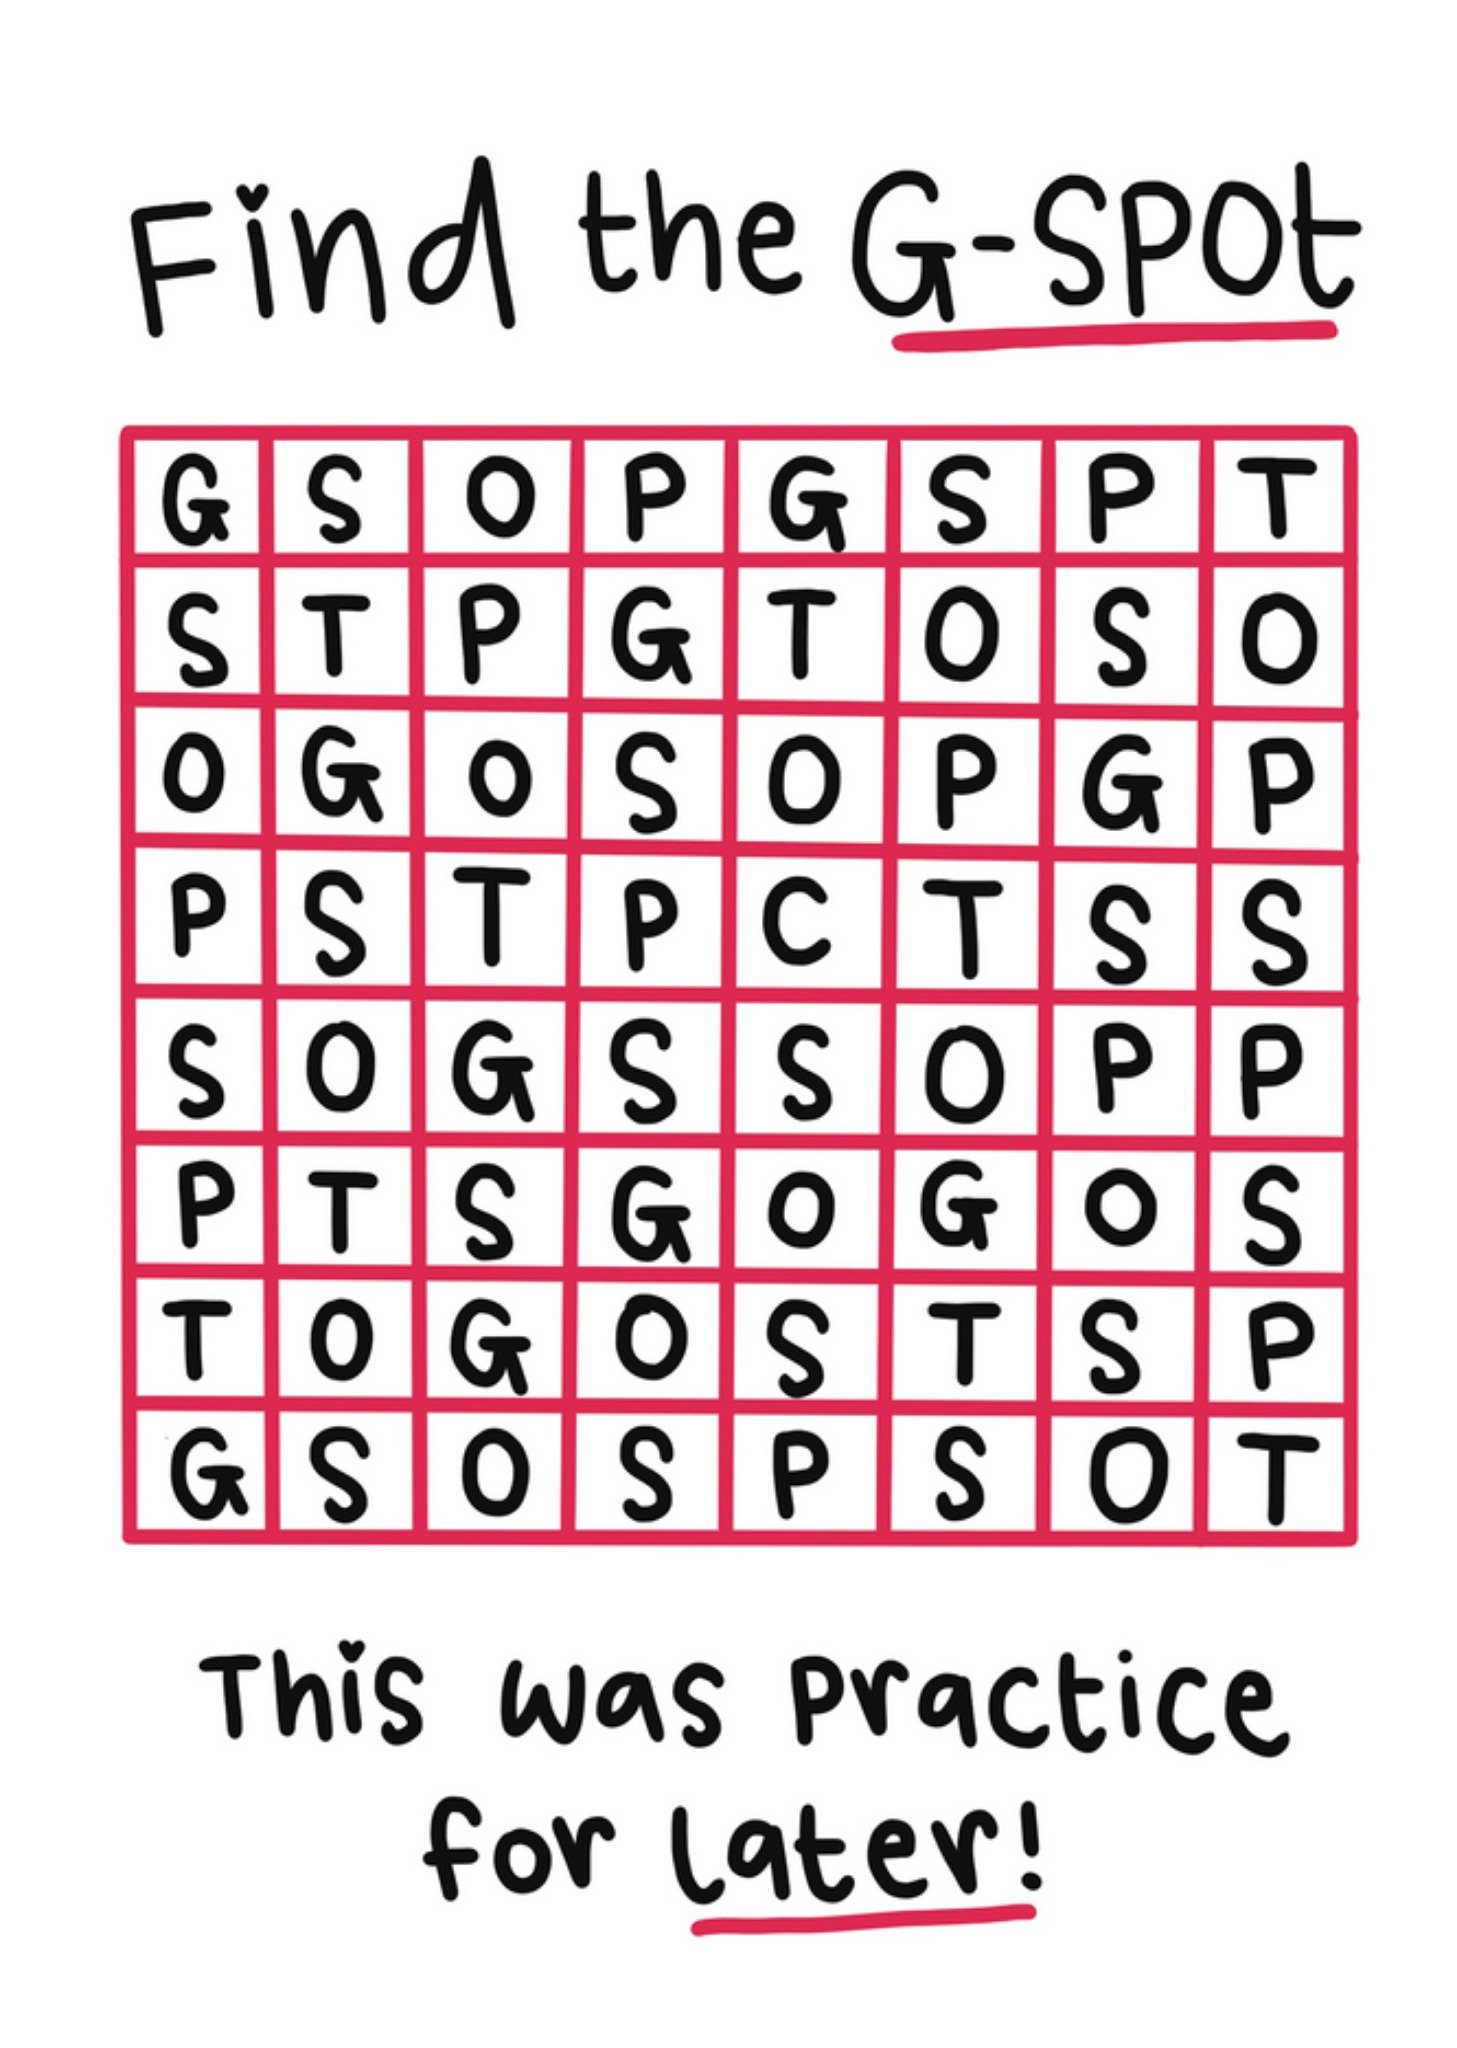 Moonpig Cheeky And Naughty Find The G-Spot Word Search Typography Valentine's Day Card, Large